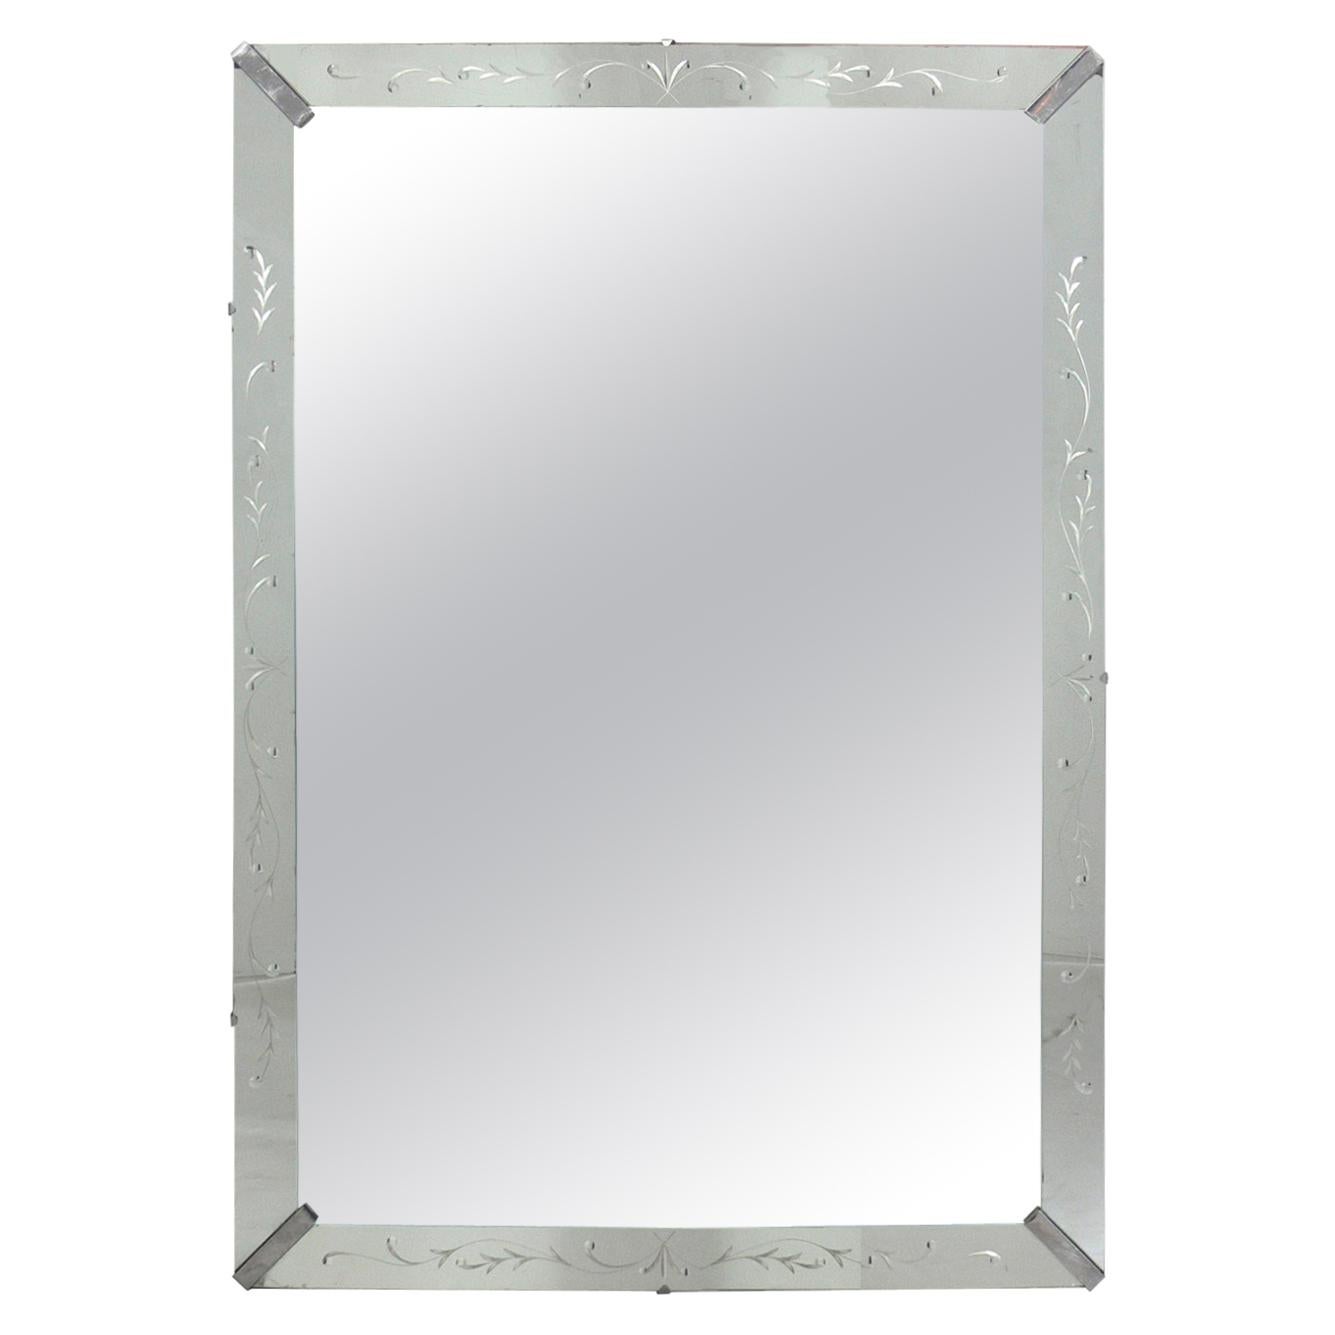 Clean Lined 1940s Mirror with Nickel Fittings